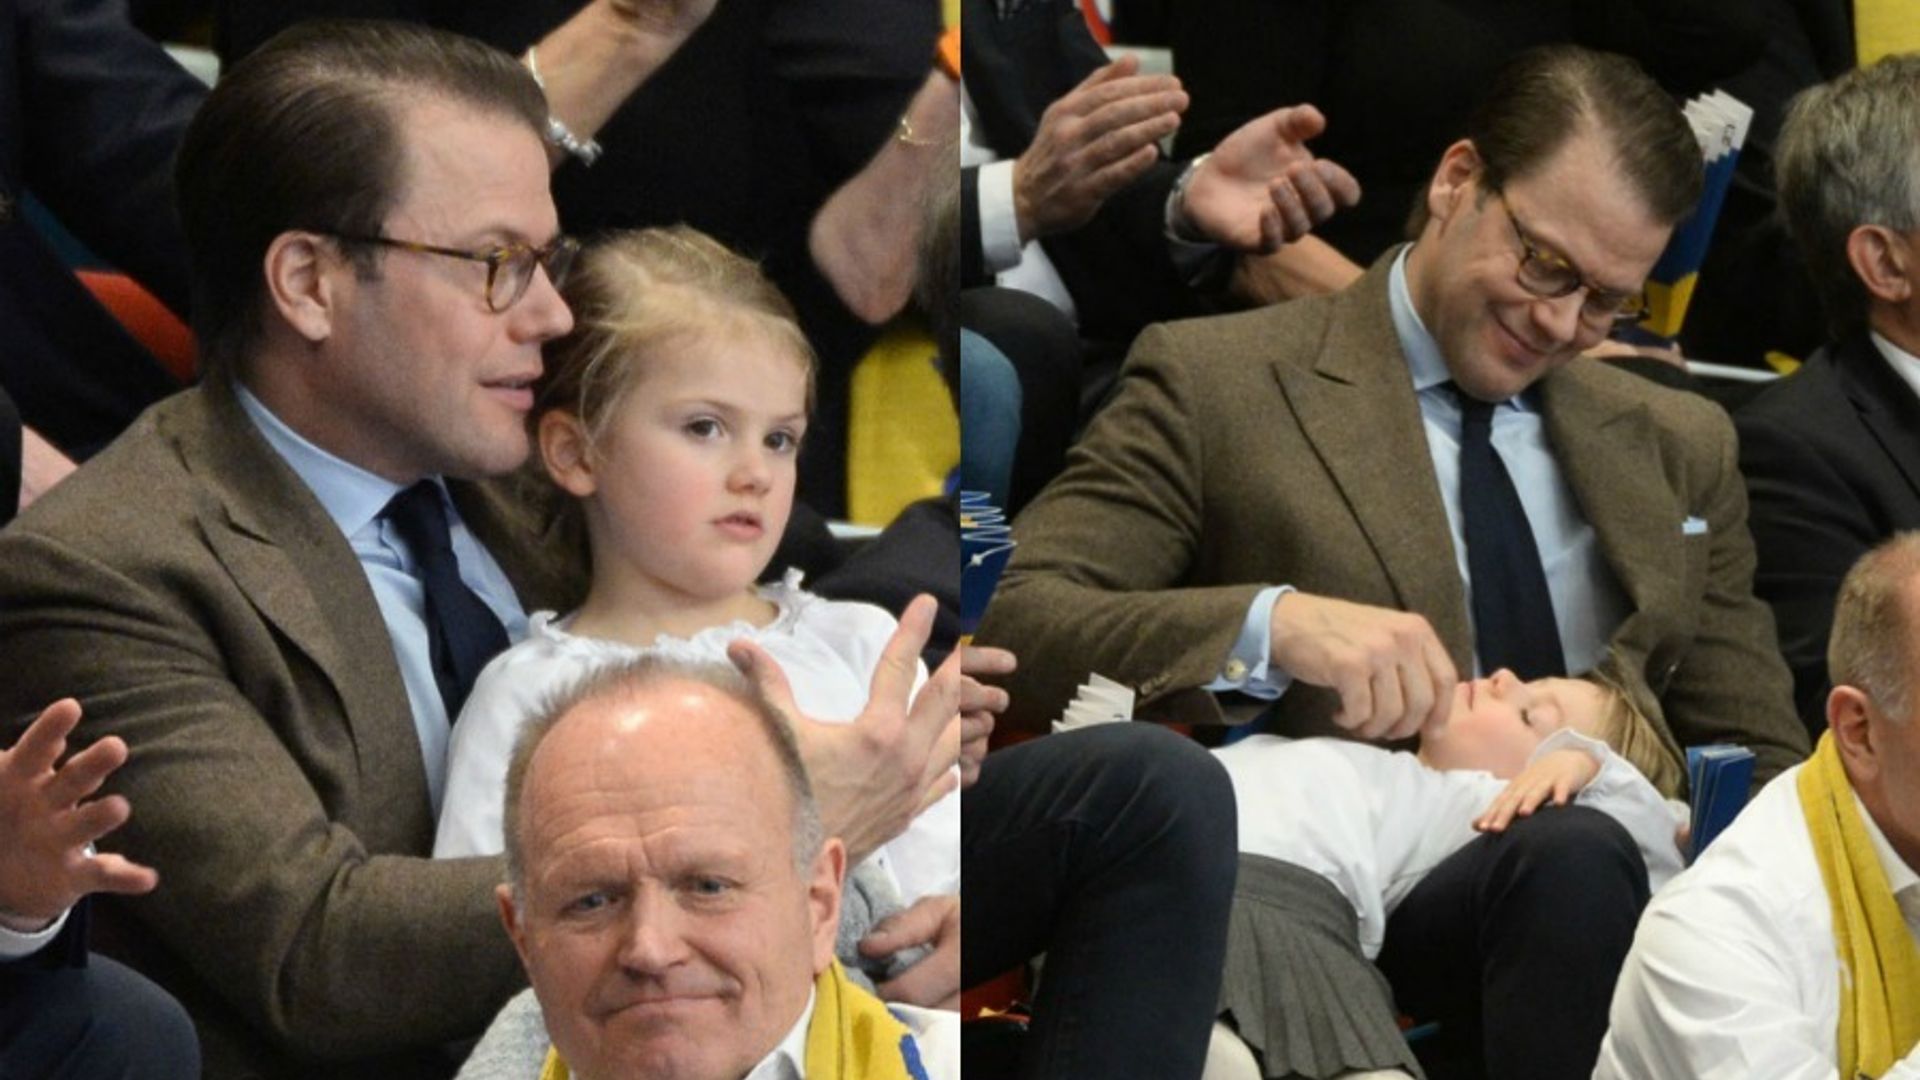 Princess Estelle couldn't help falling asleep on dad Prince Daniel's ...